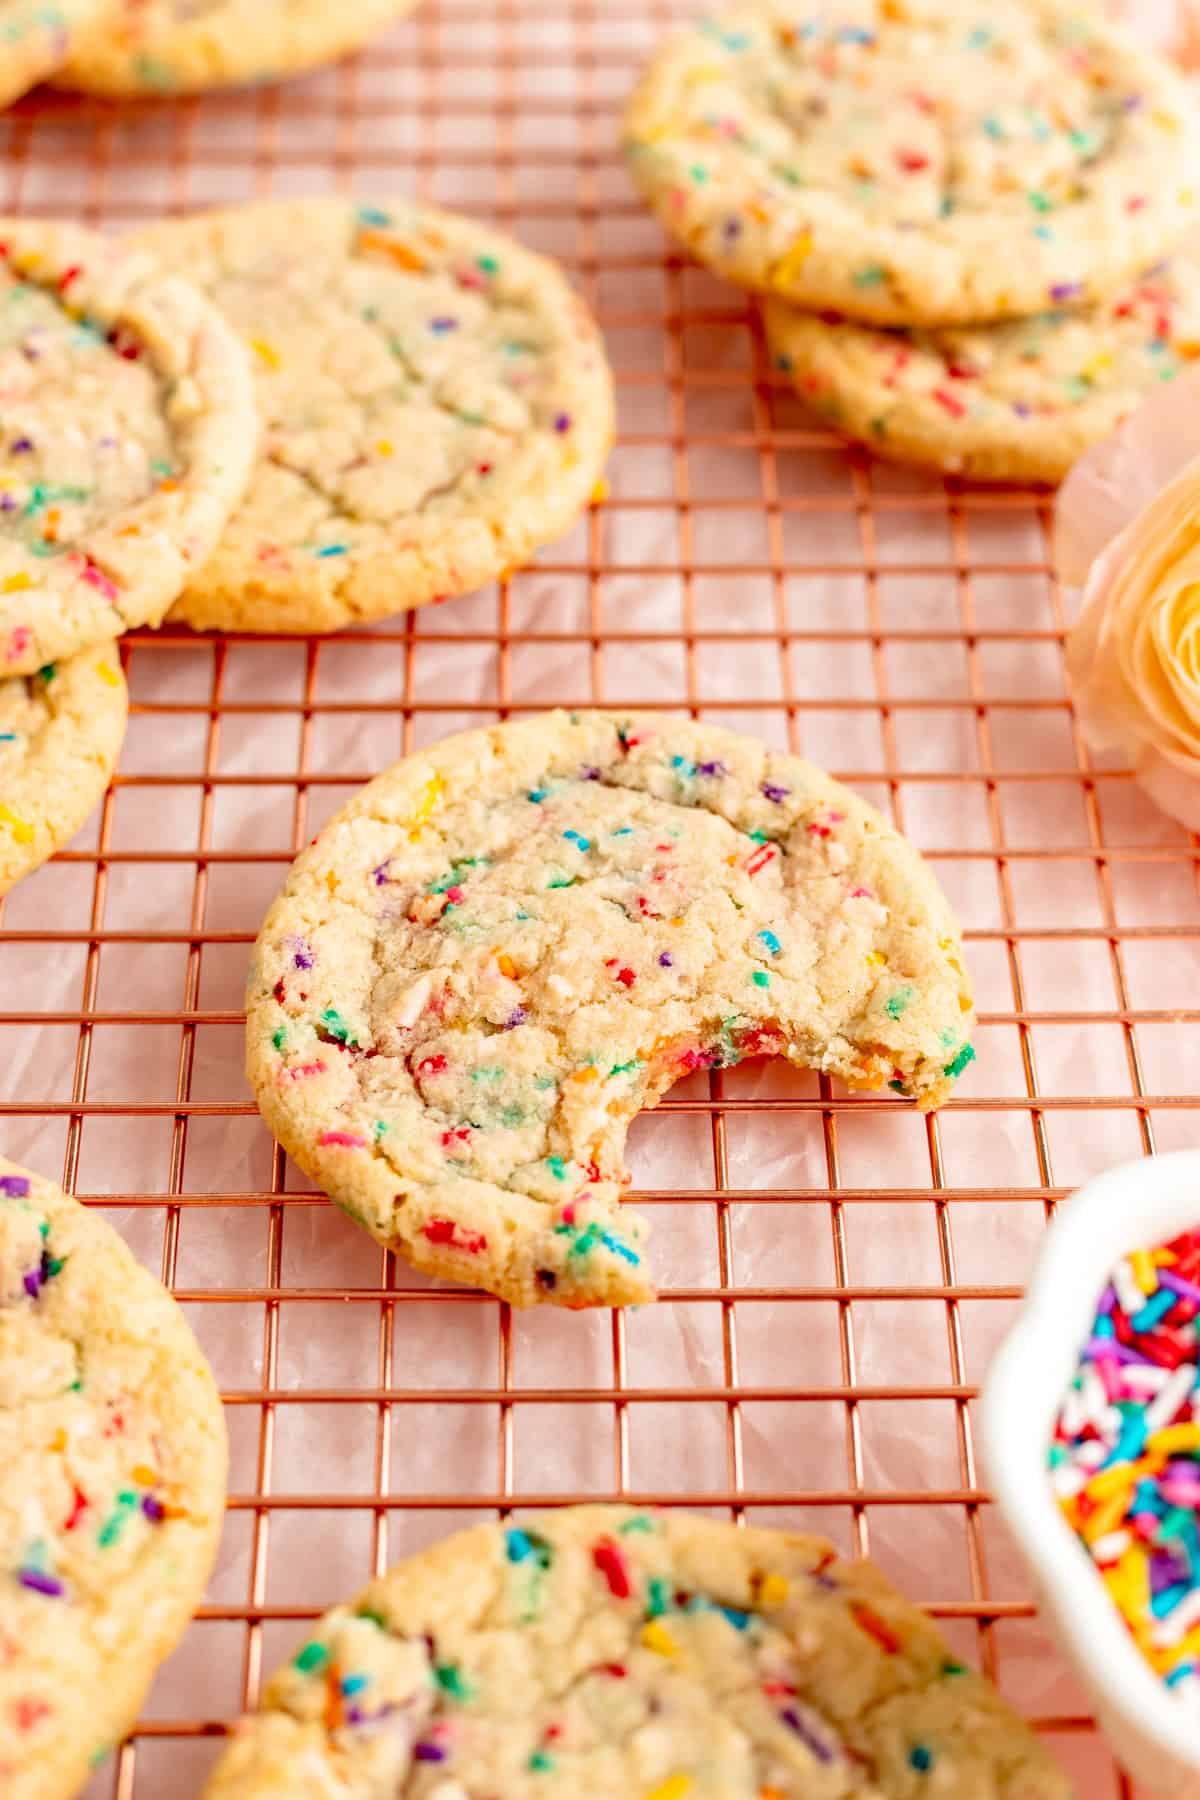 confetti sugar cookie with a bit out on copper wire rack surrounded by other sprinkle cookies.